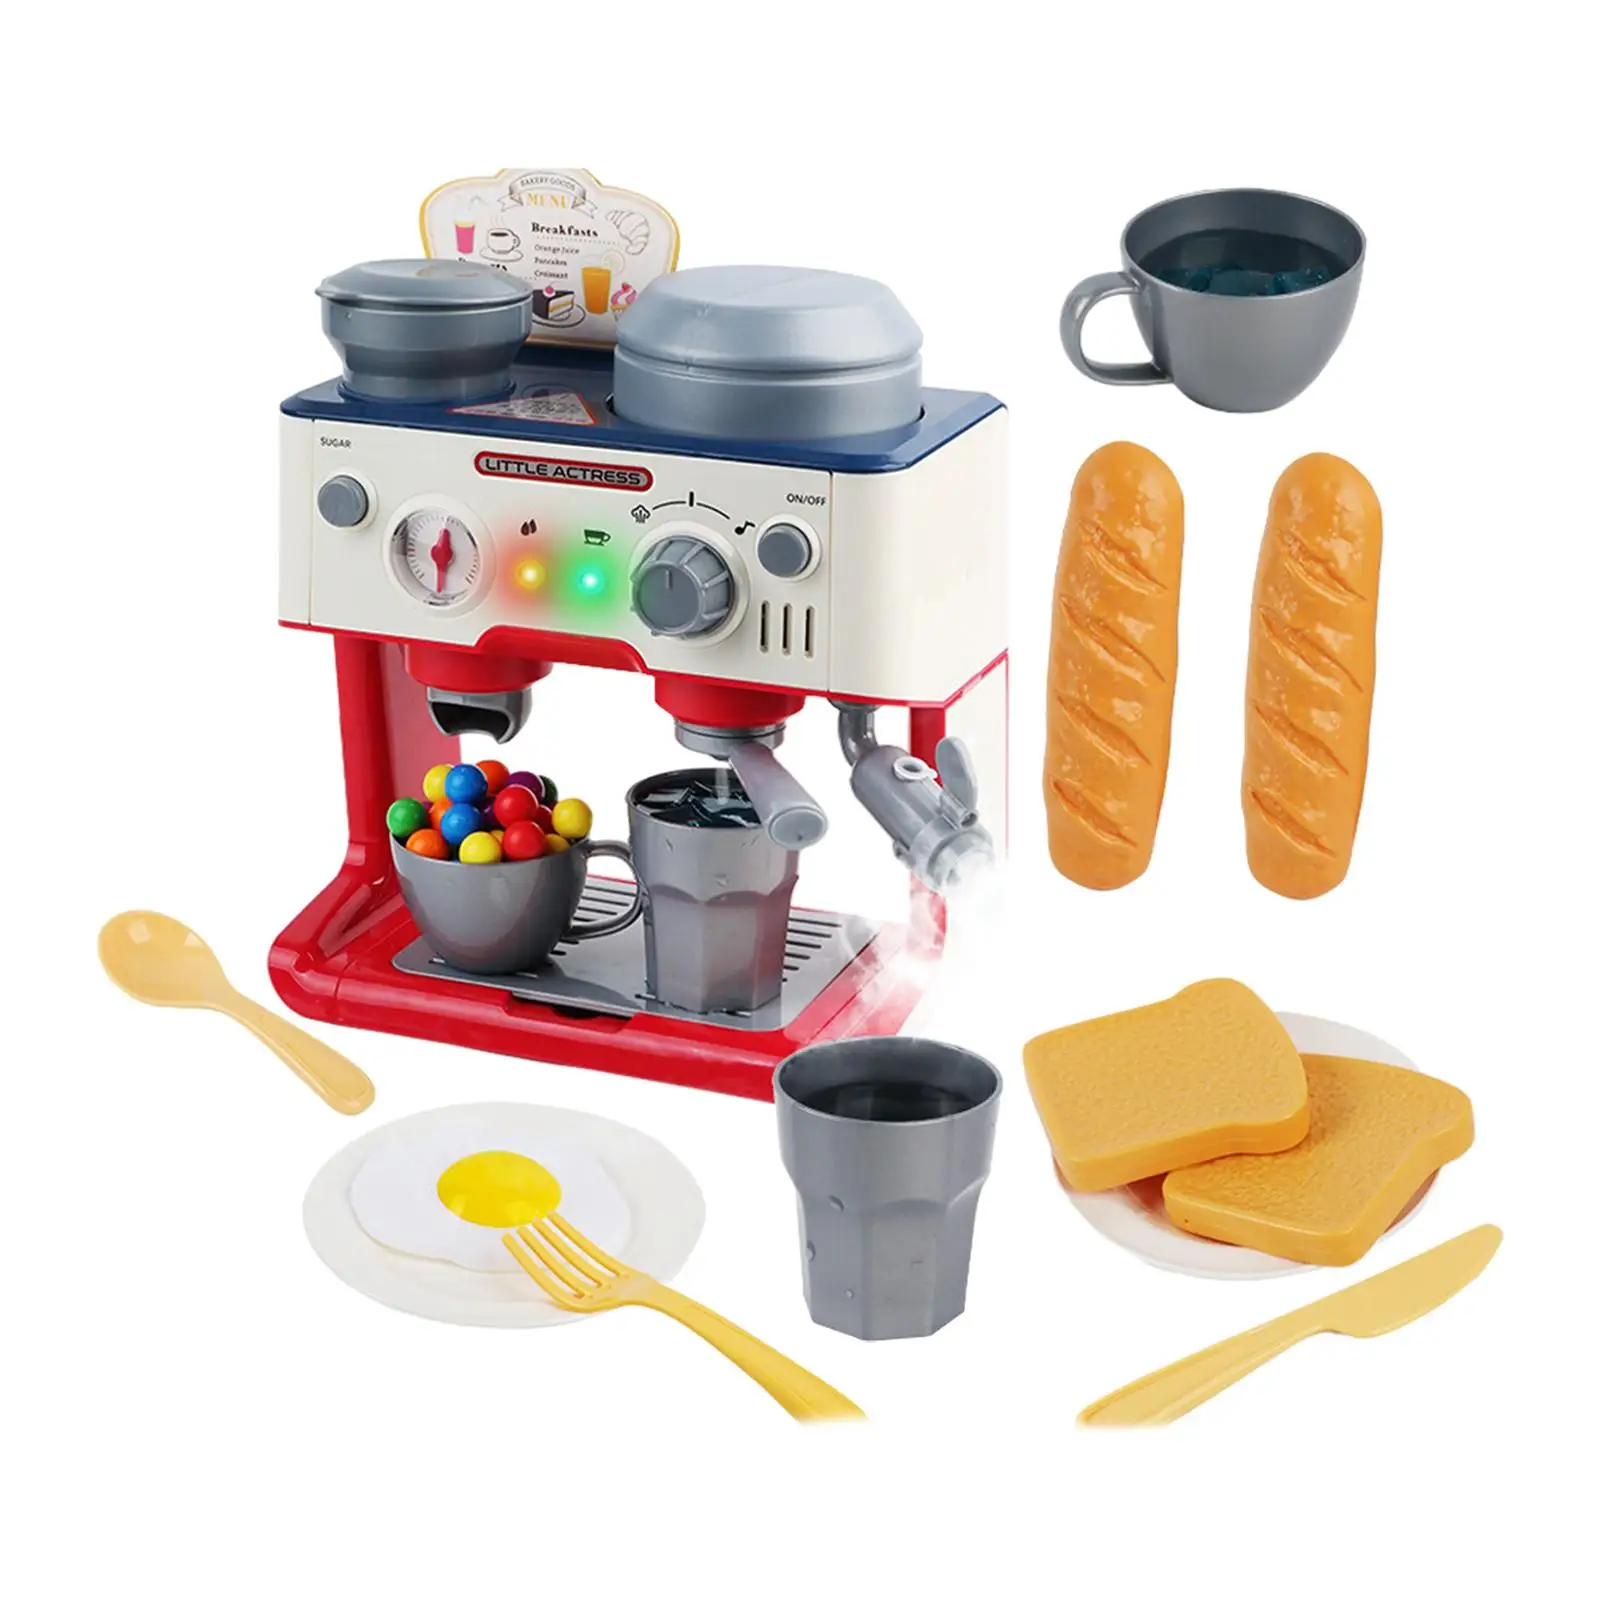 Coffee Maker Toy Set with Lights Imaginative Play Pretend Cooking Play Kitchen Accessories for Girls Boys Children Holiday Gifts